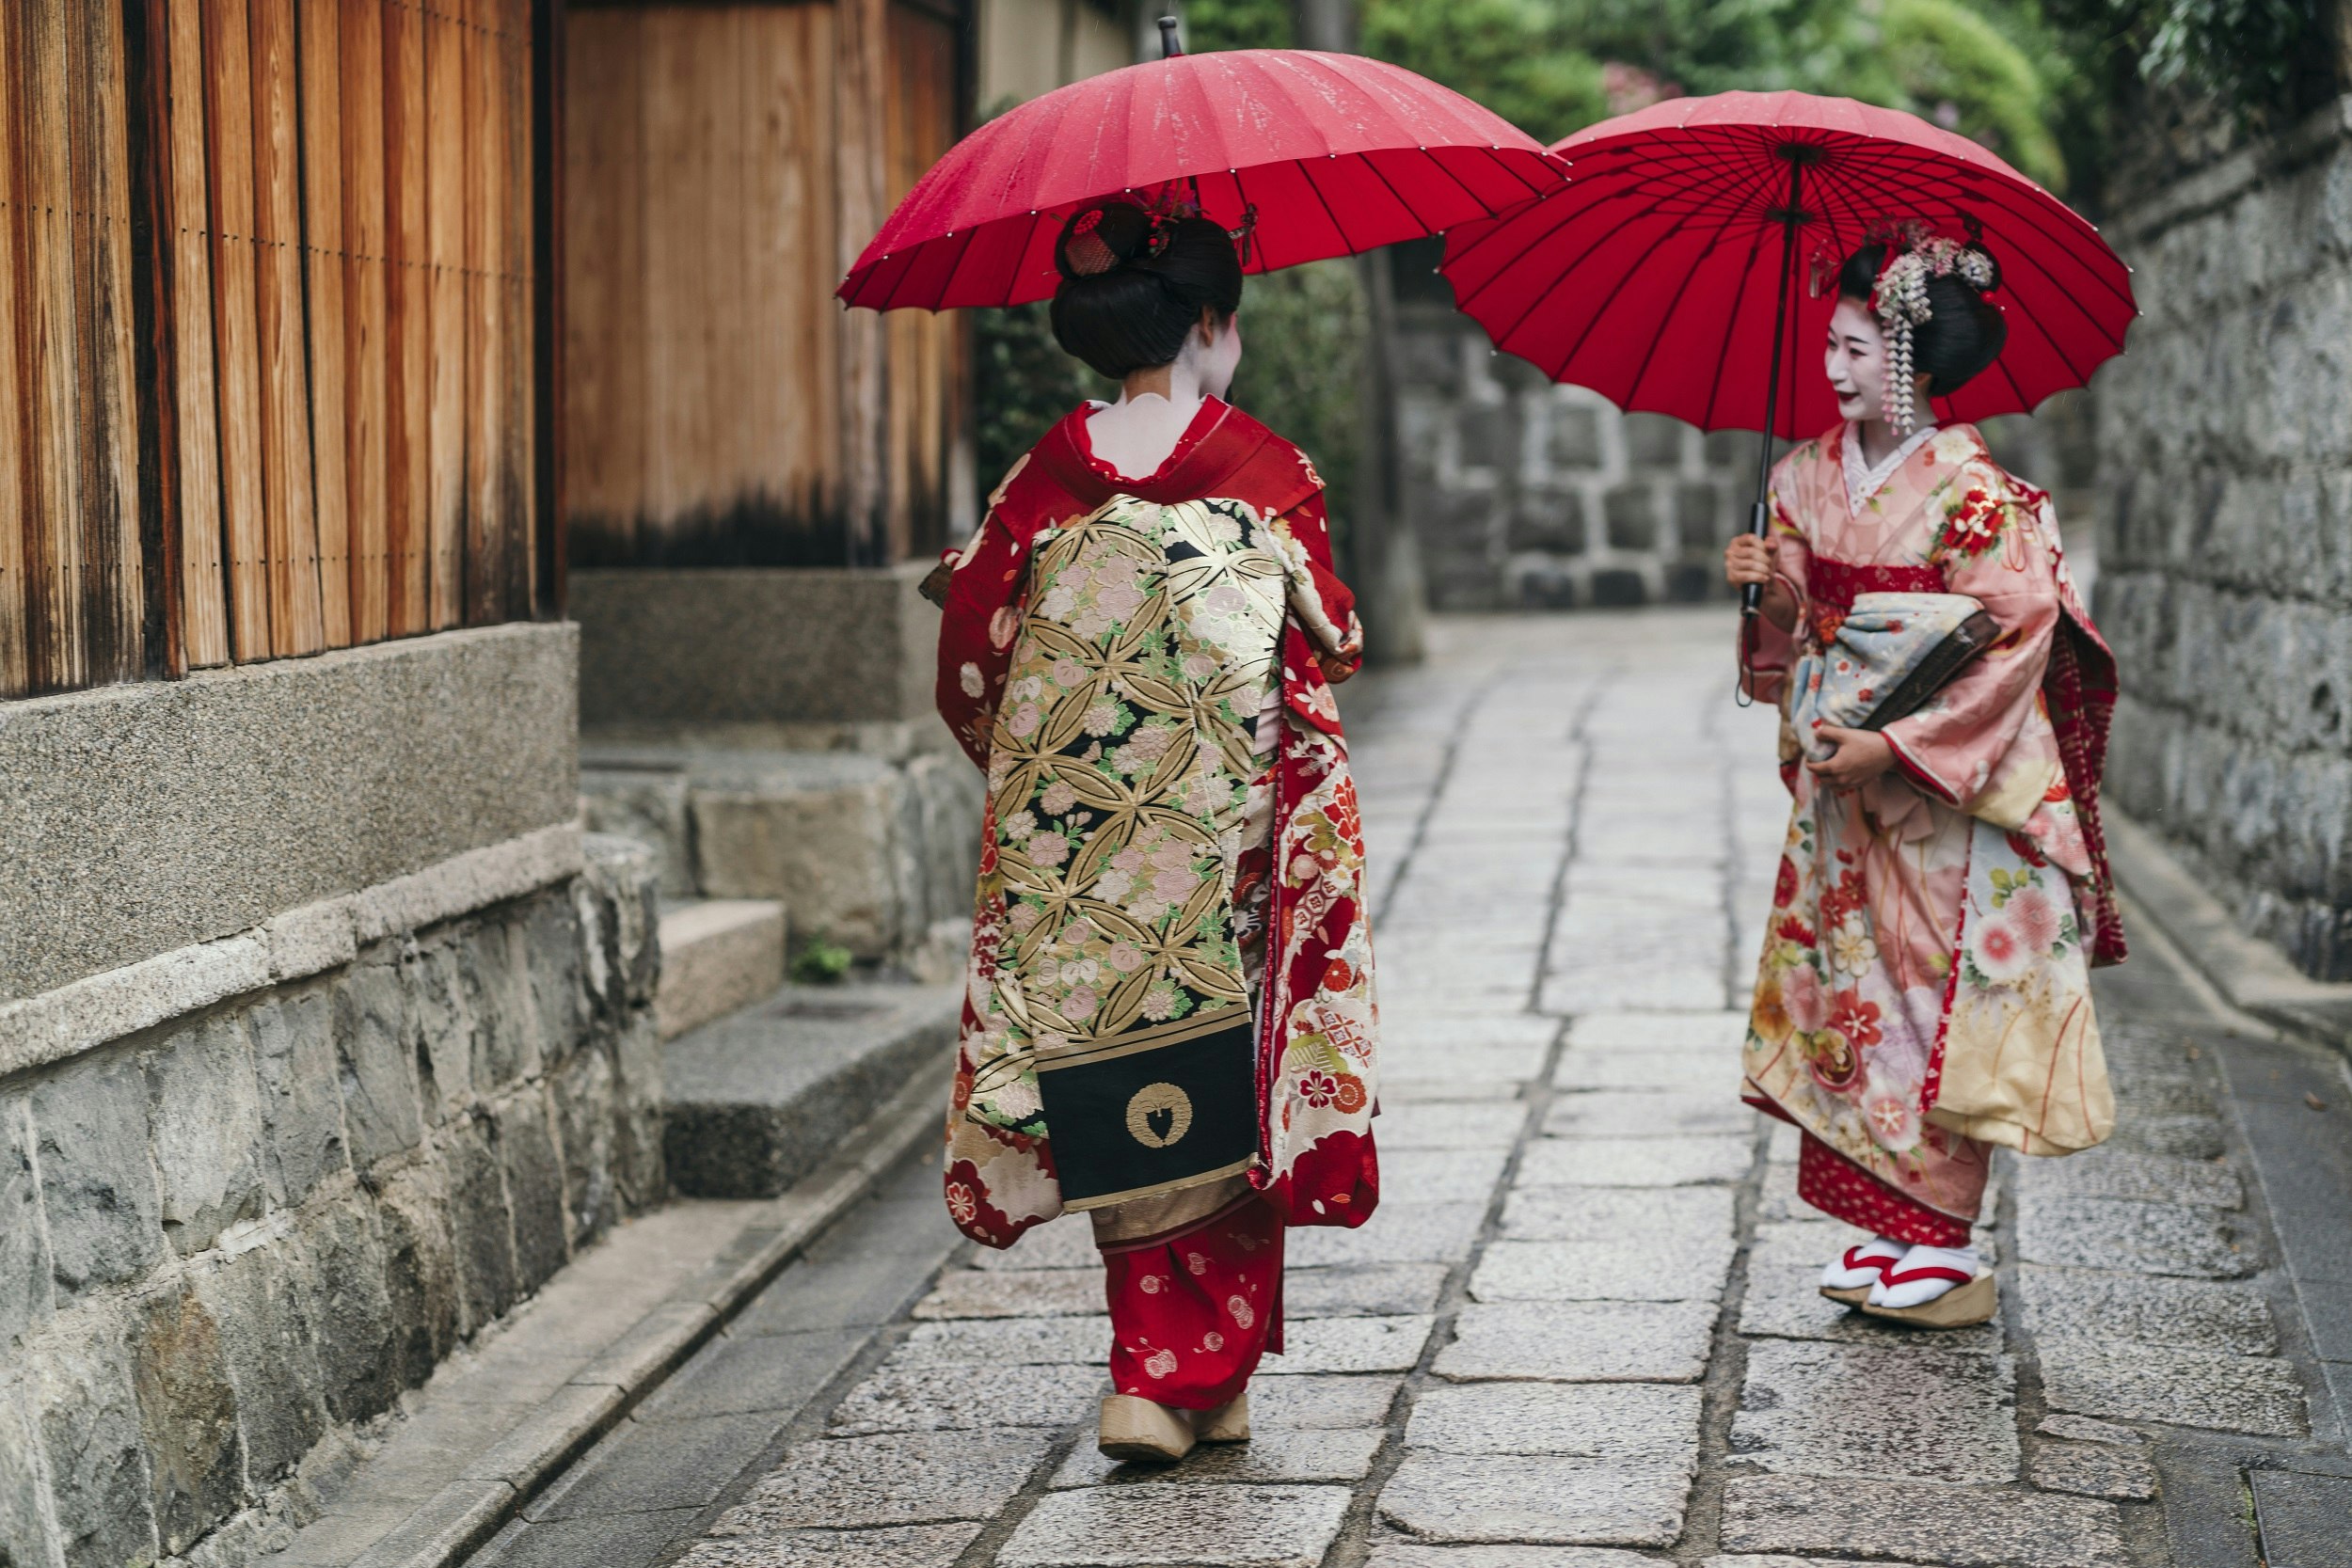 Maiko geishas with red umbrellas walking on a street of Gion in Kyoto, Japan.